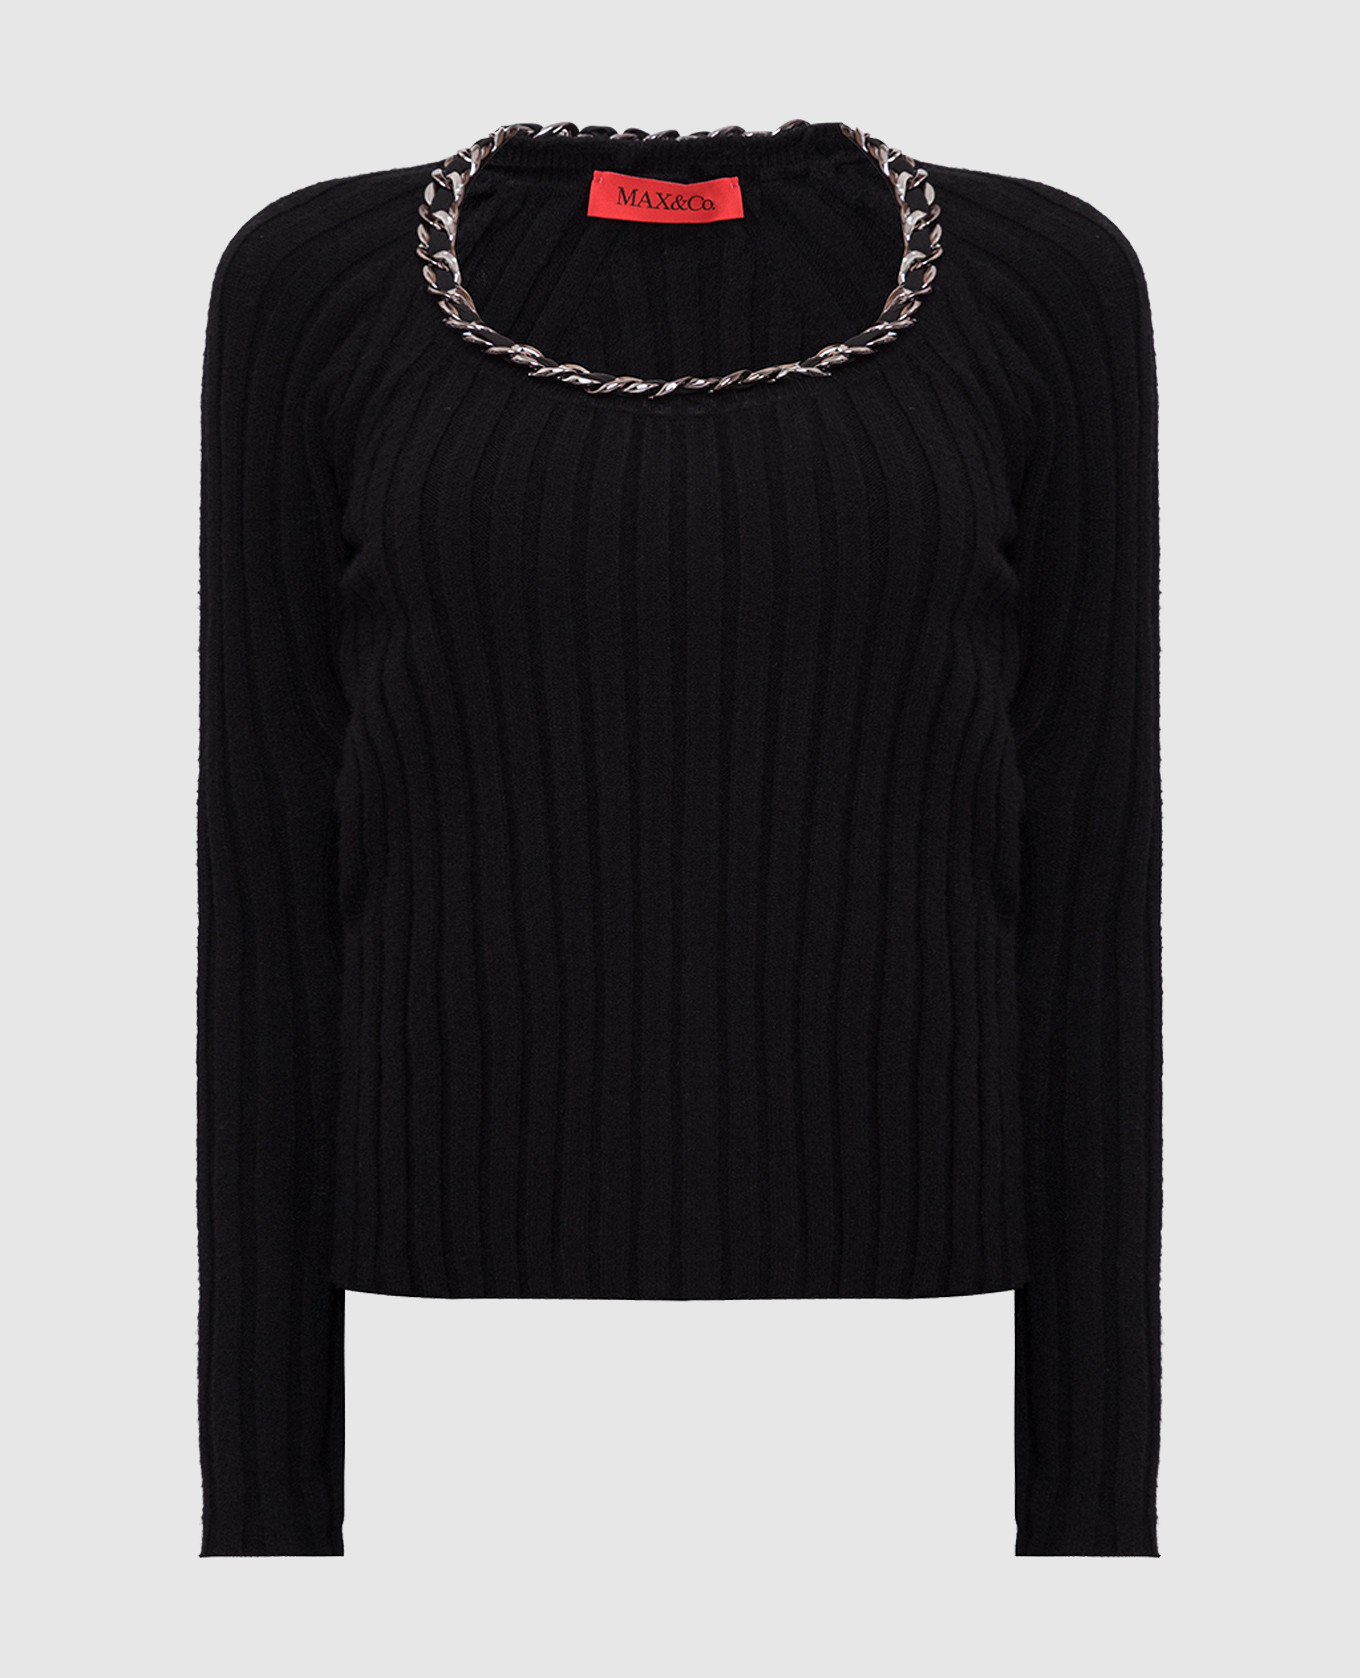 Pablo black jumper with chain